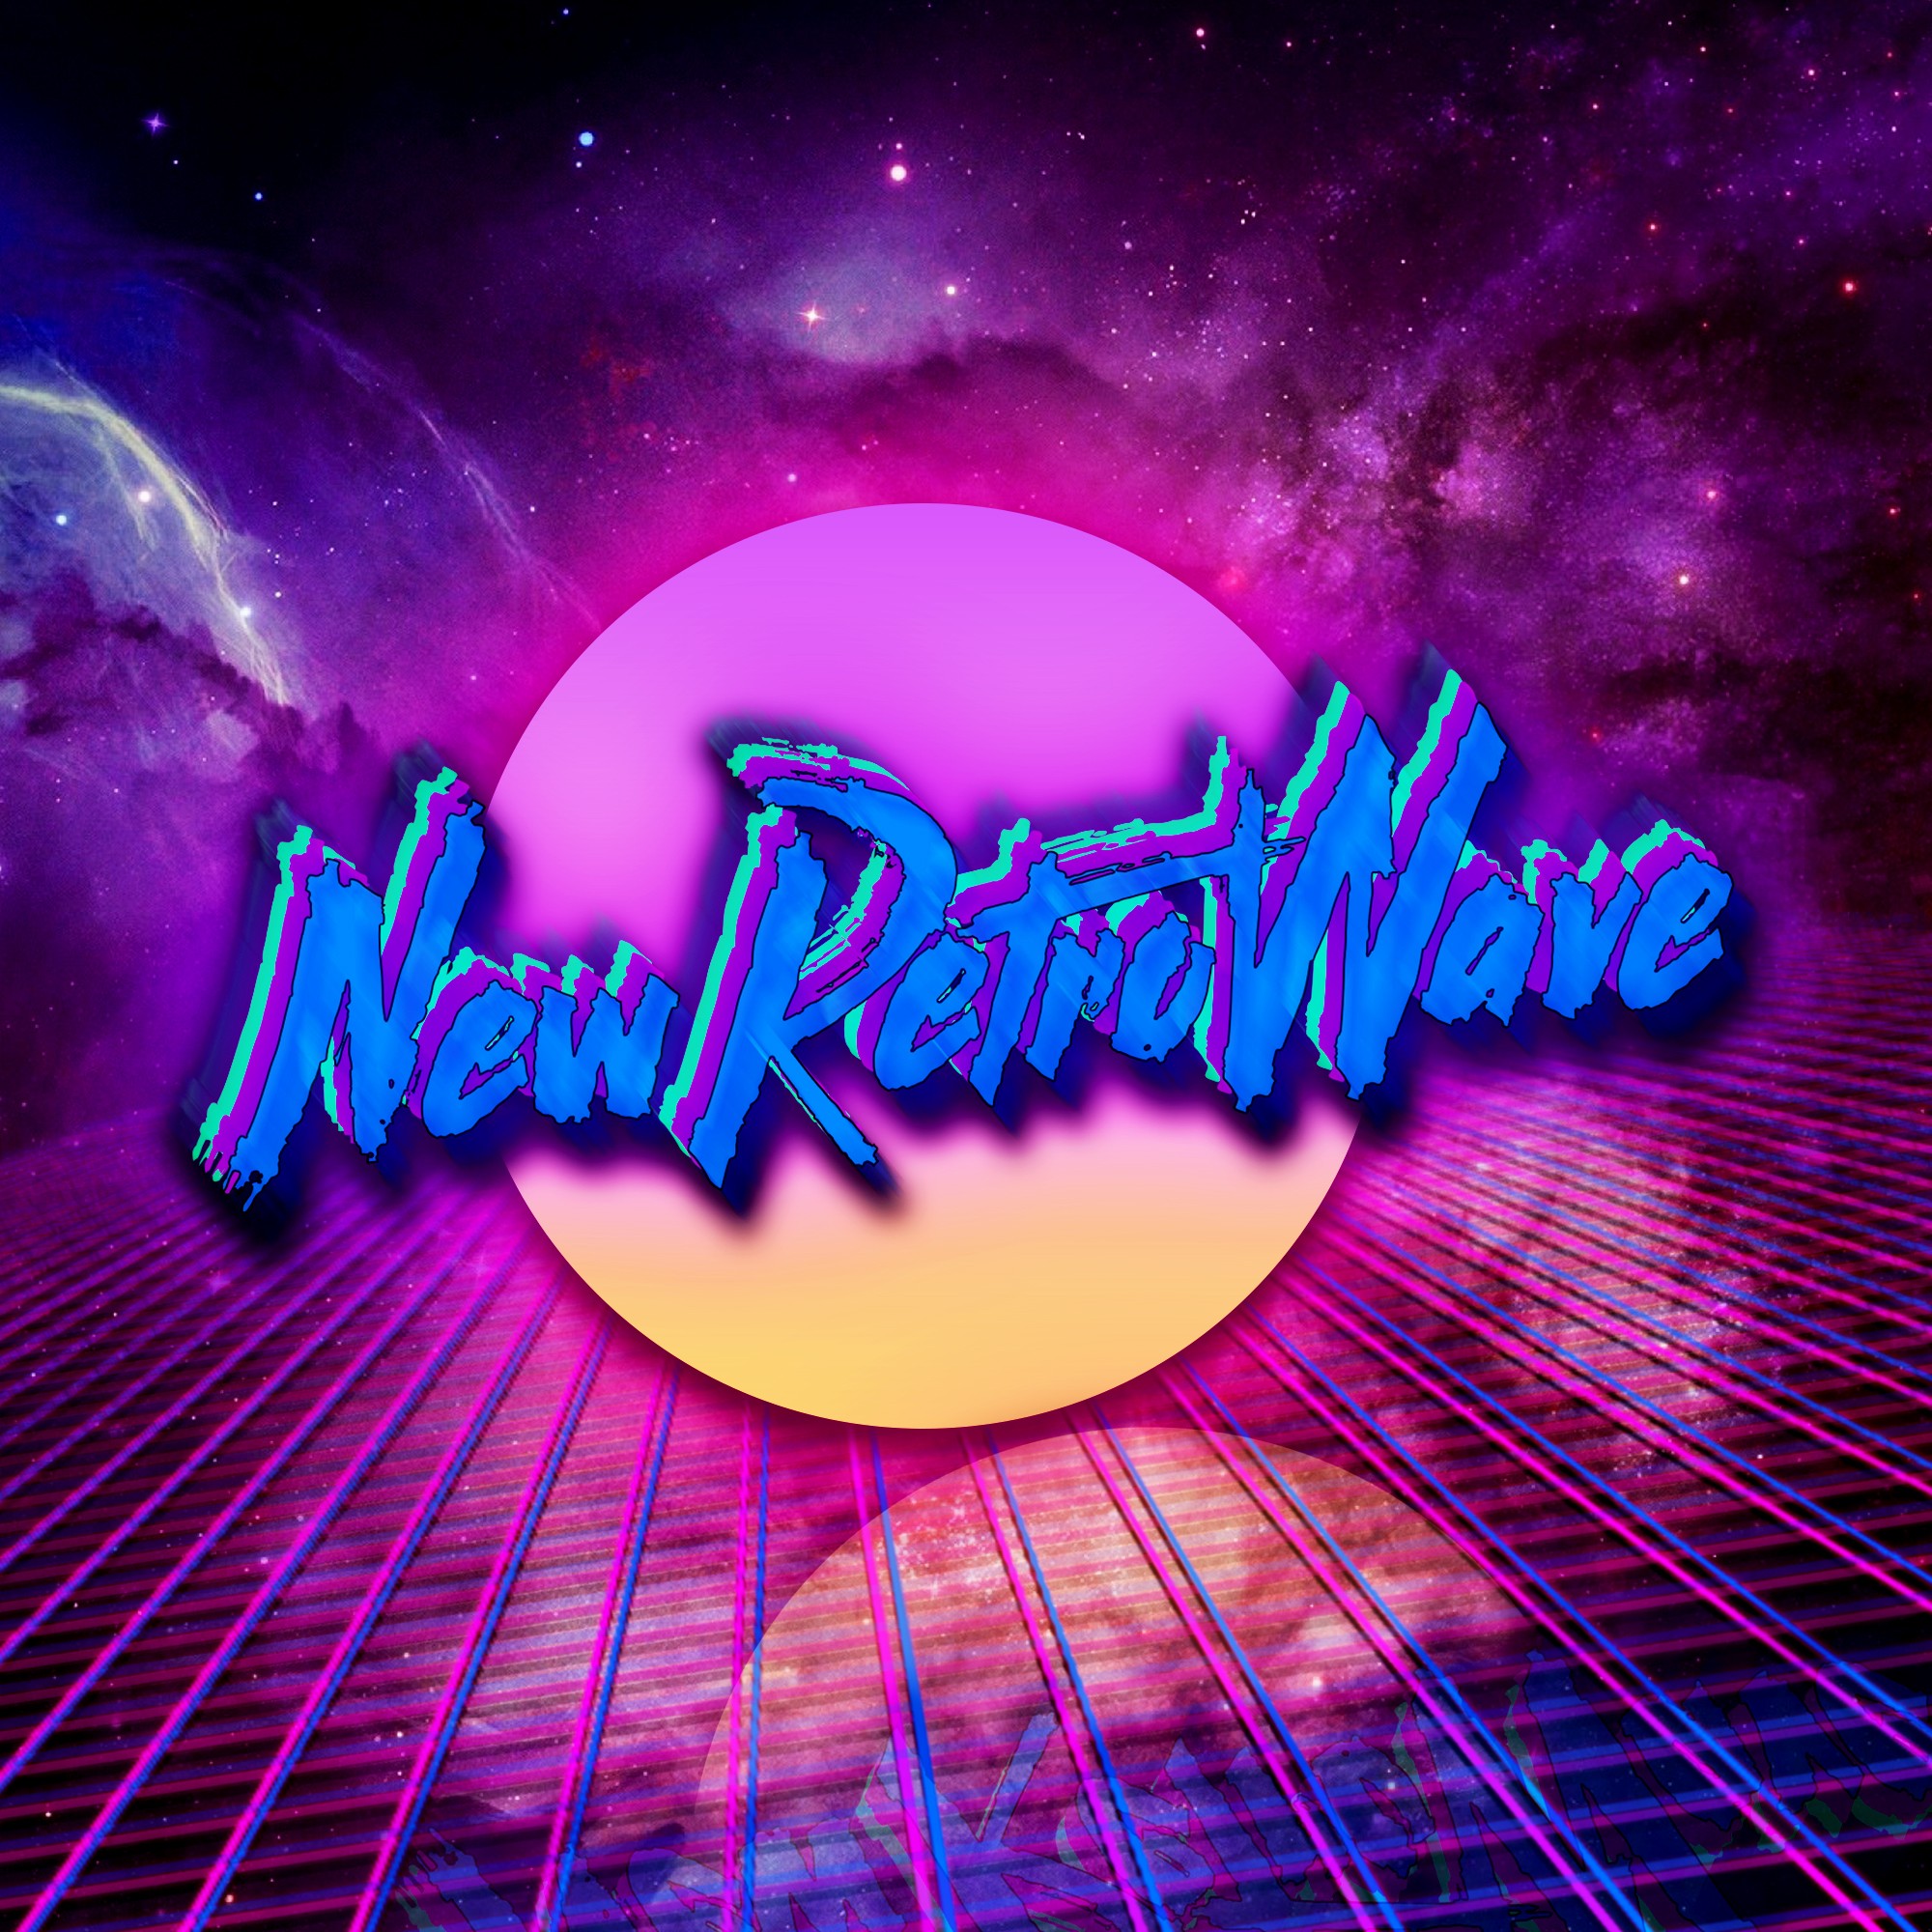 New Retro Wave Neon Space 1980s Synthwave Digital Art Typography 2000x2000